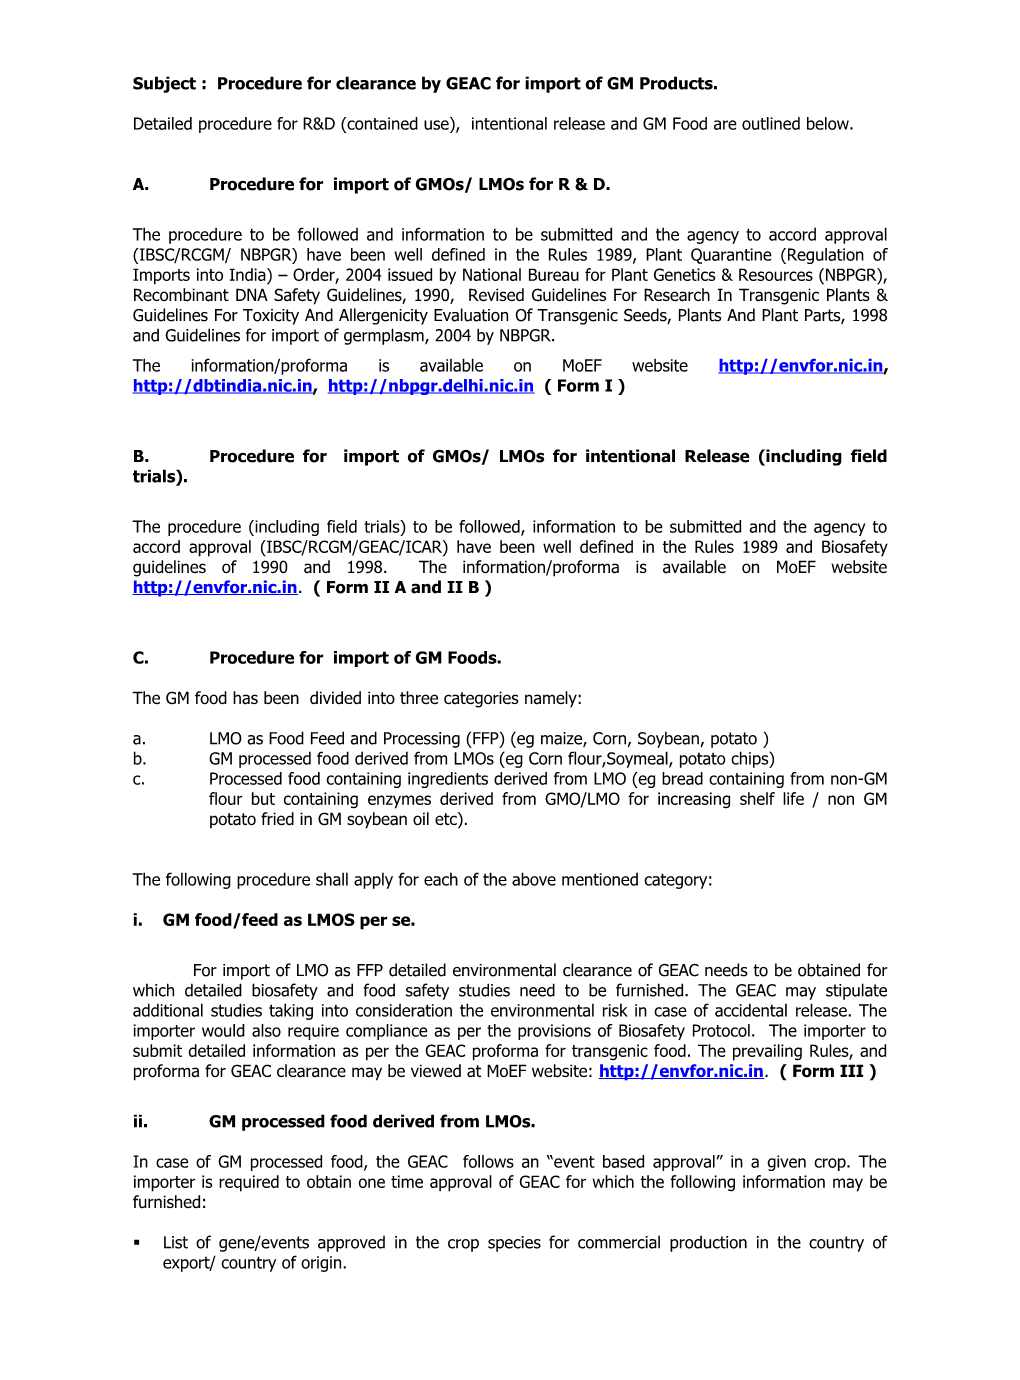 Subject : Procedure for Clearance by GEAC for Import of GM Products